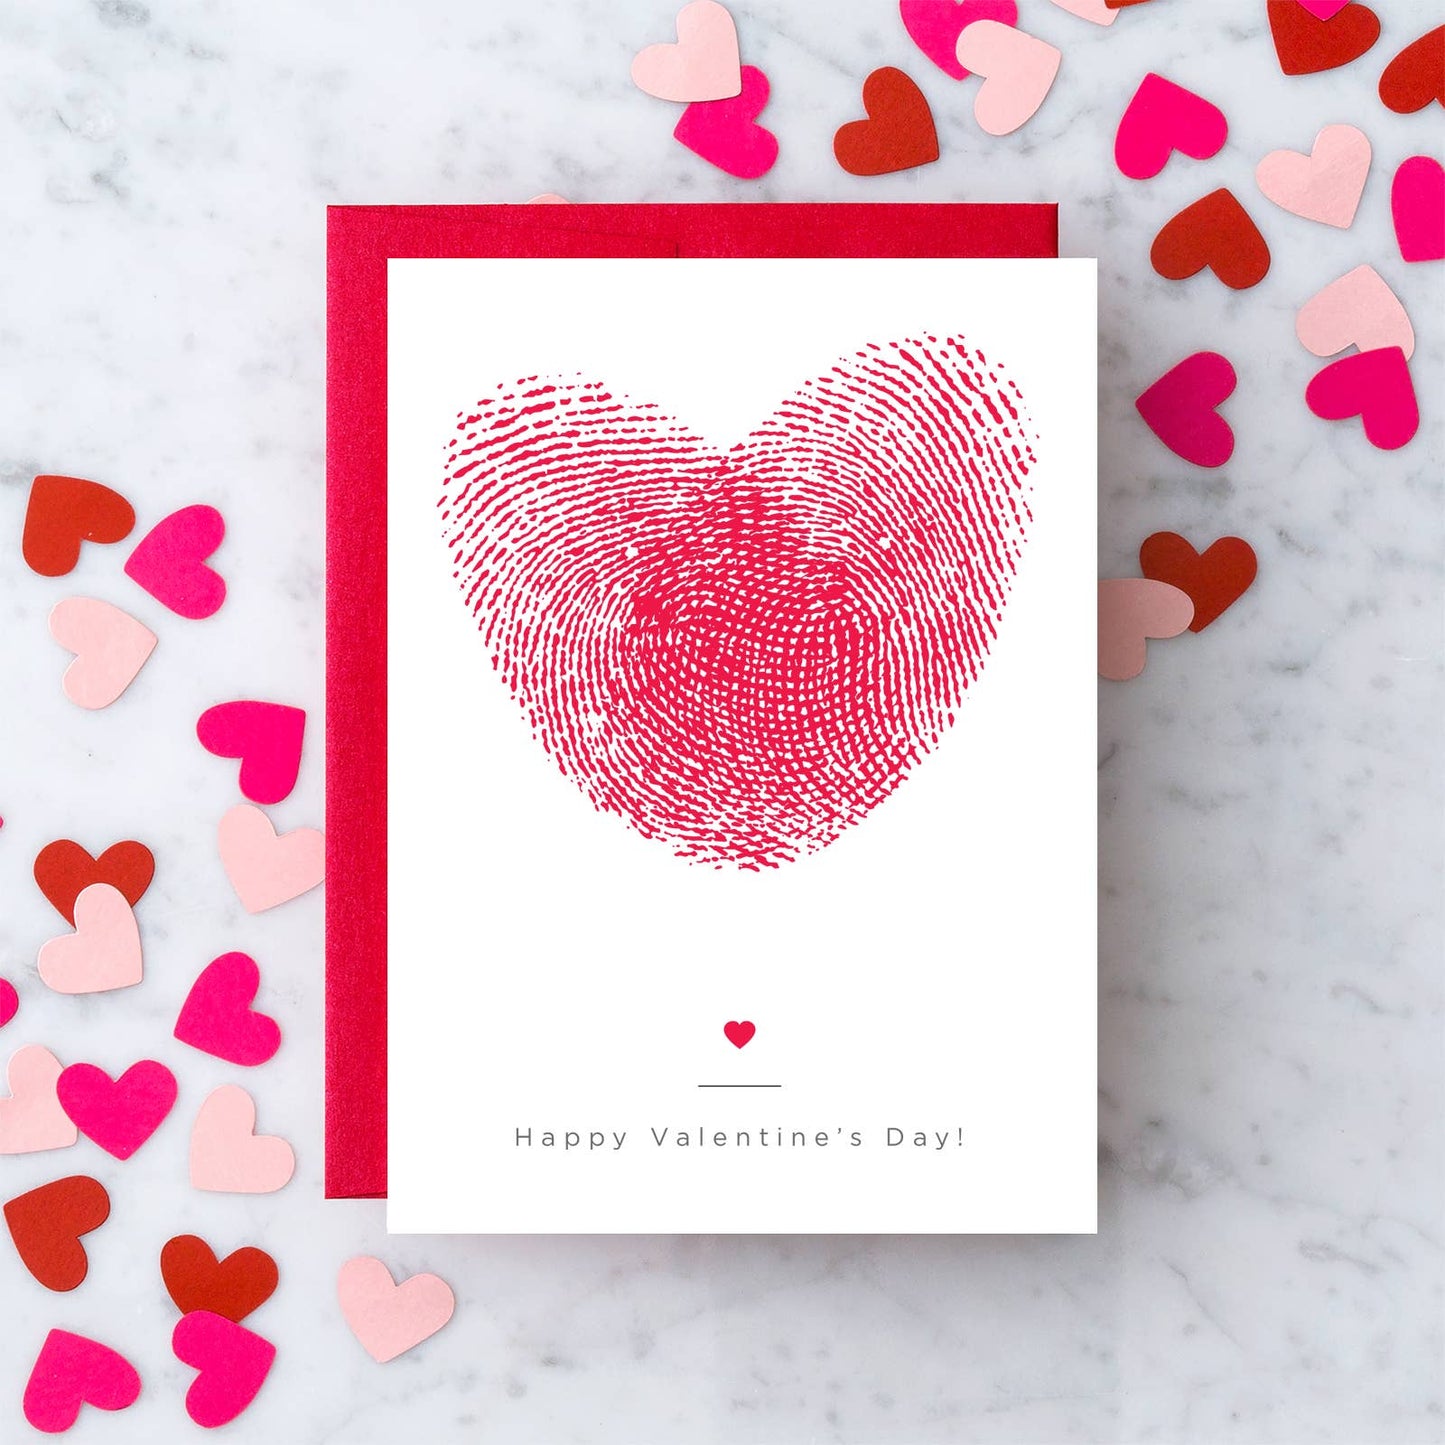 Cards: Thumbprints Heart Valentine's Day Greeting Card